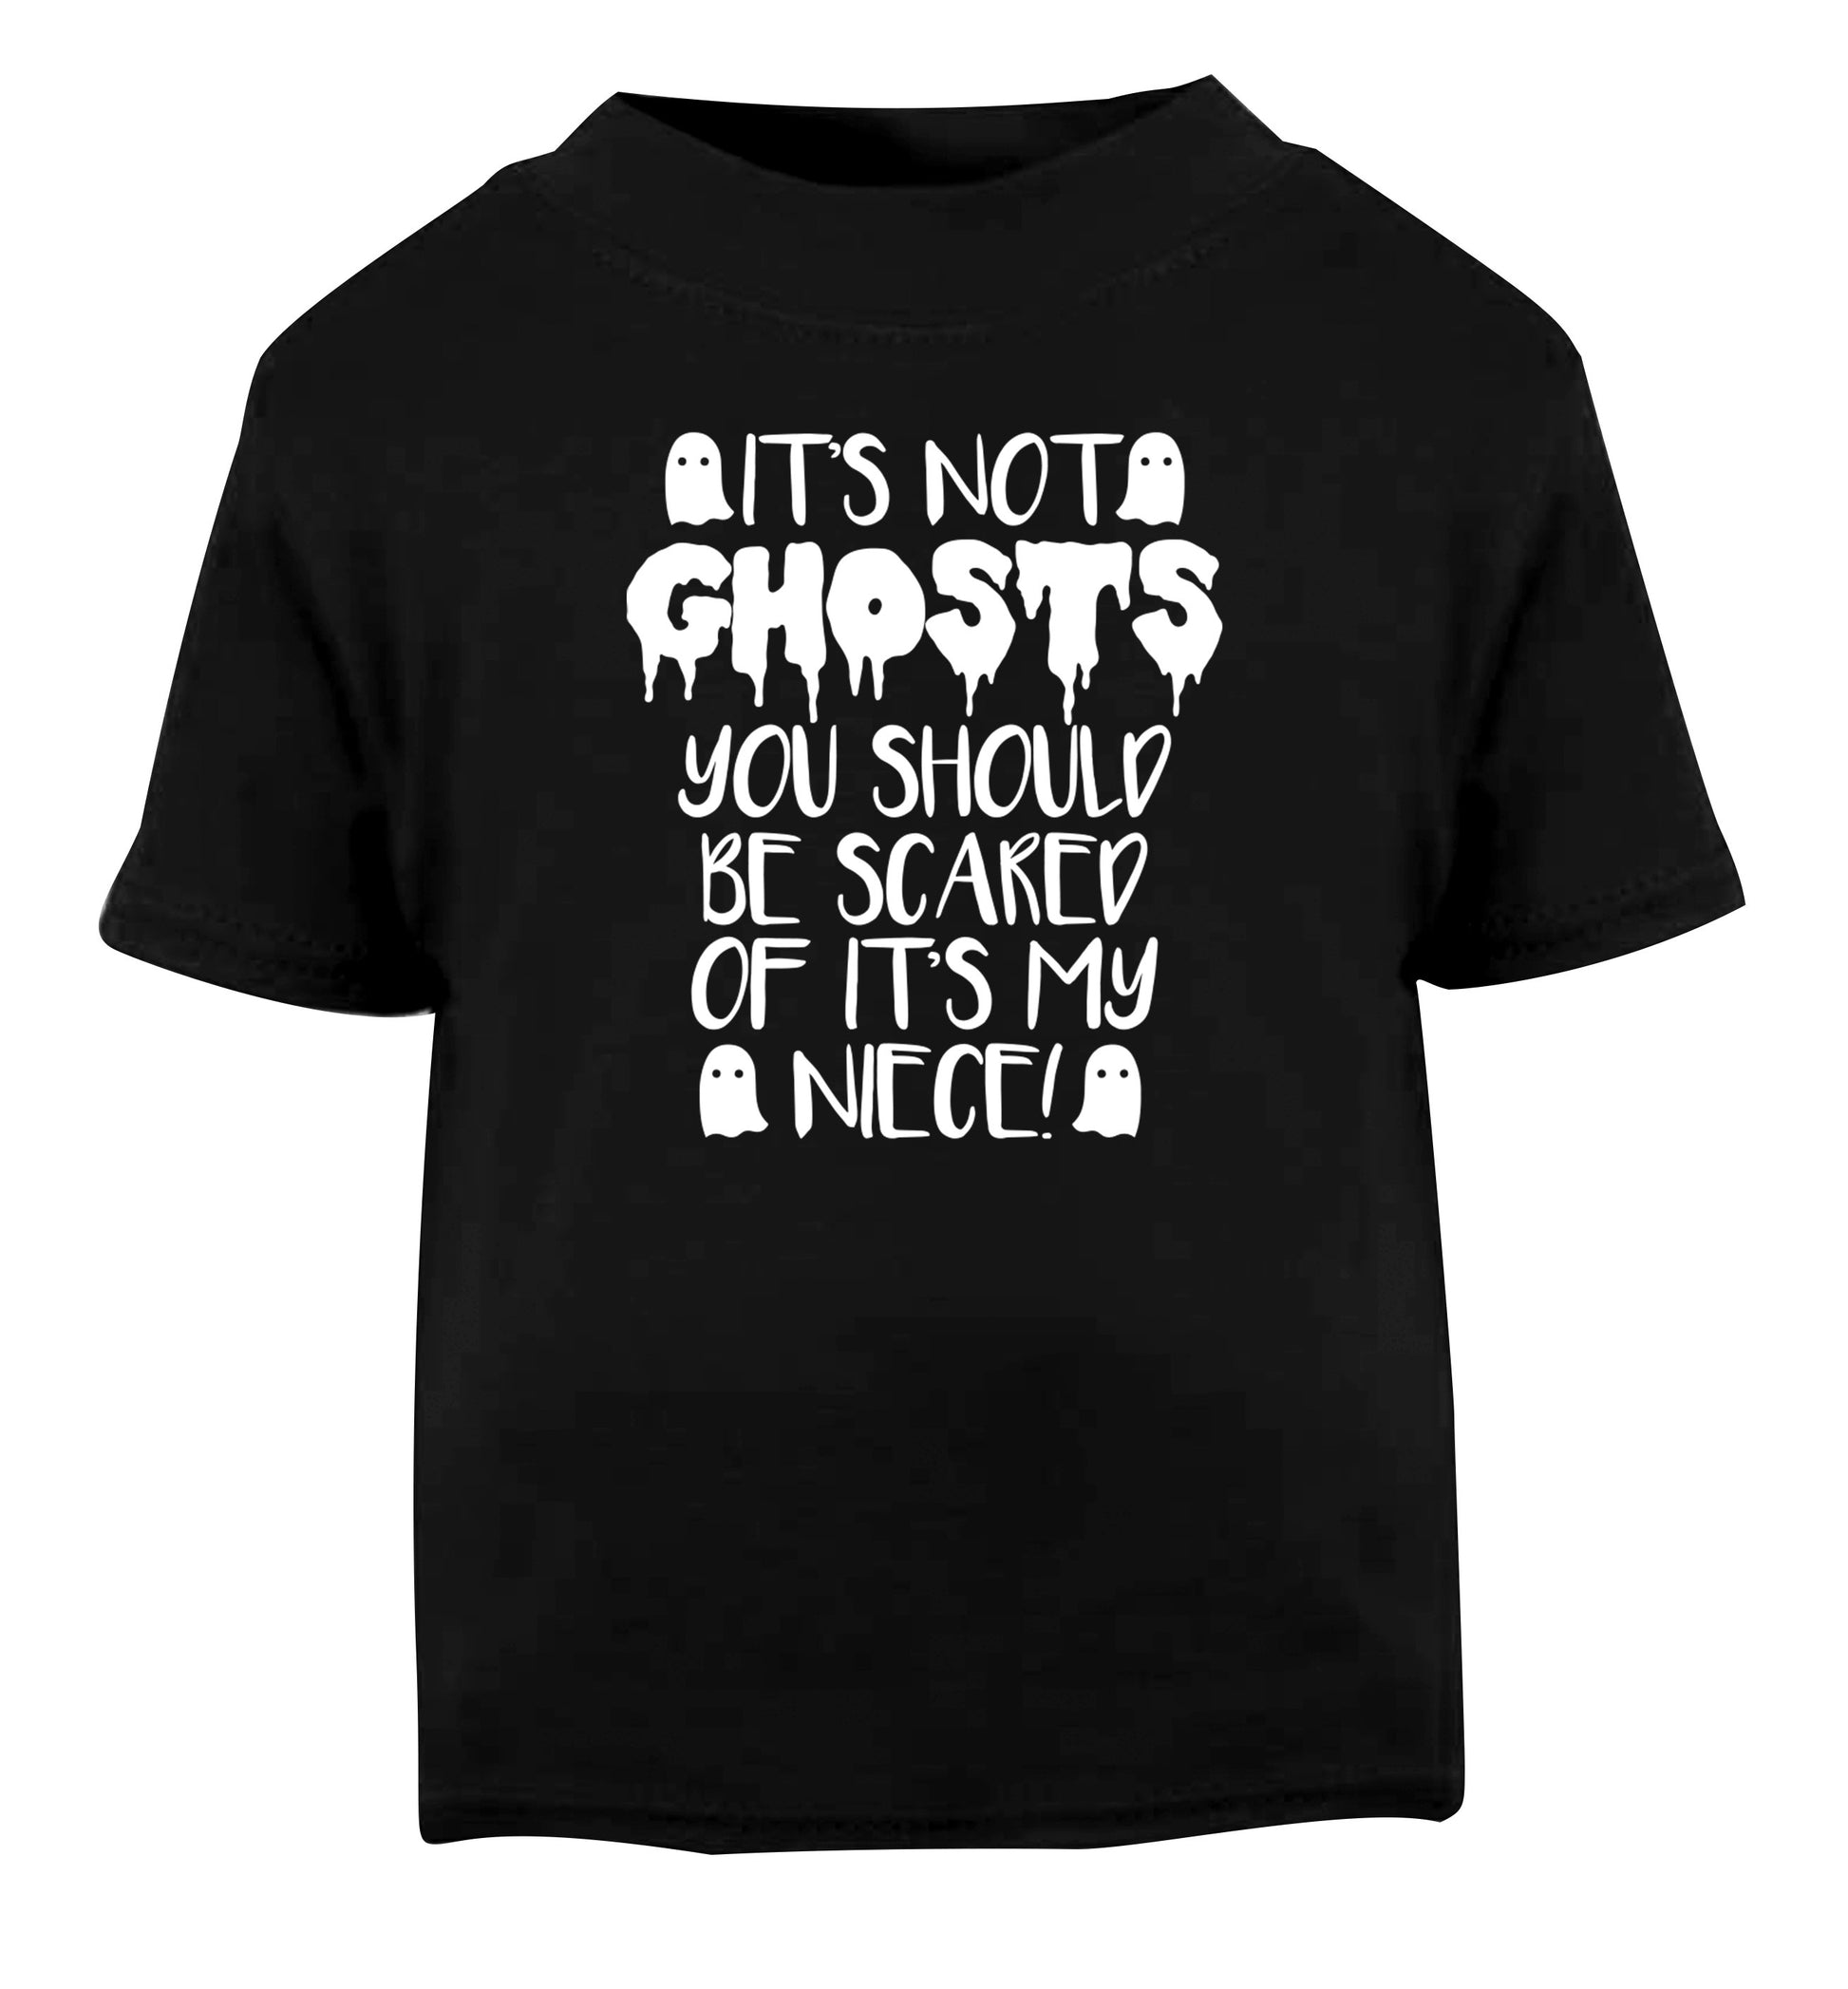 It's not ghosts you should be scared of it's my niece! Black Baby Toddler Tshirt 2 years